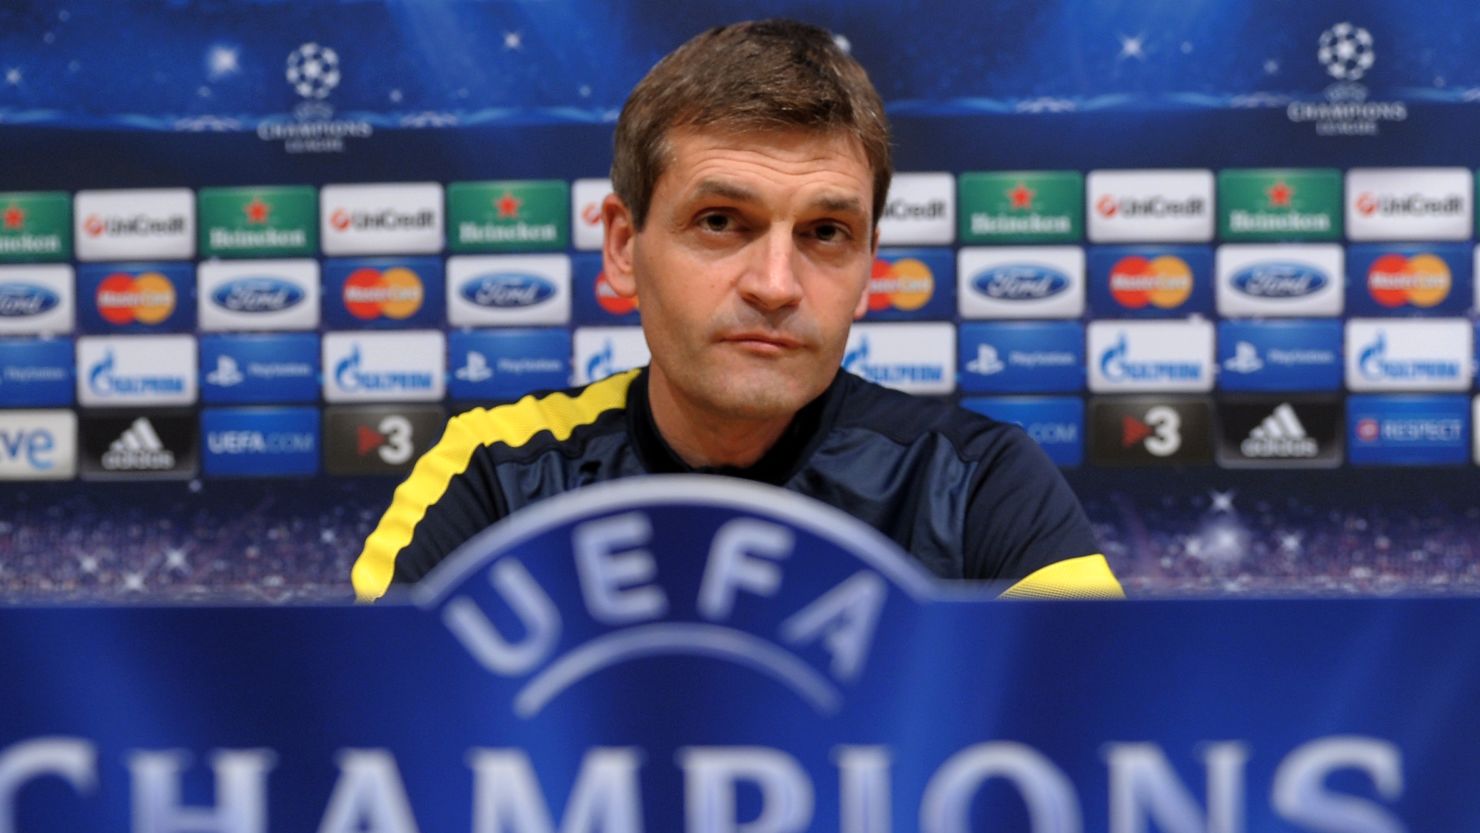 Former assistant coach Tito Vilanova led Barca to 16 wins in 17 league matches prior to his surgery.